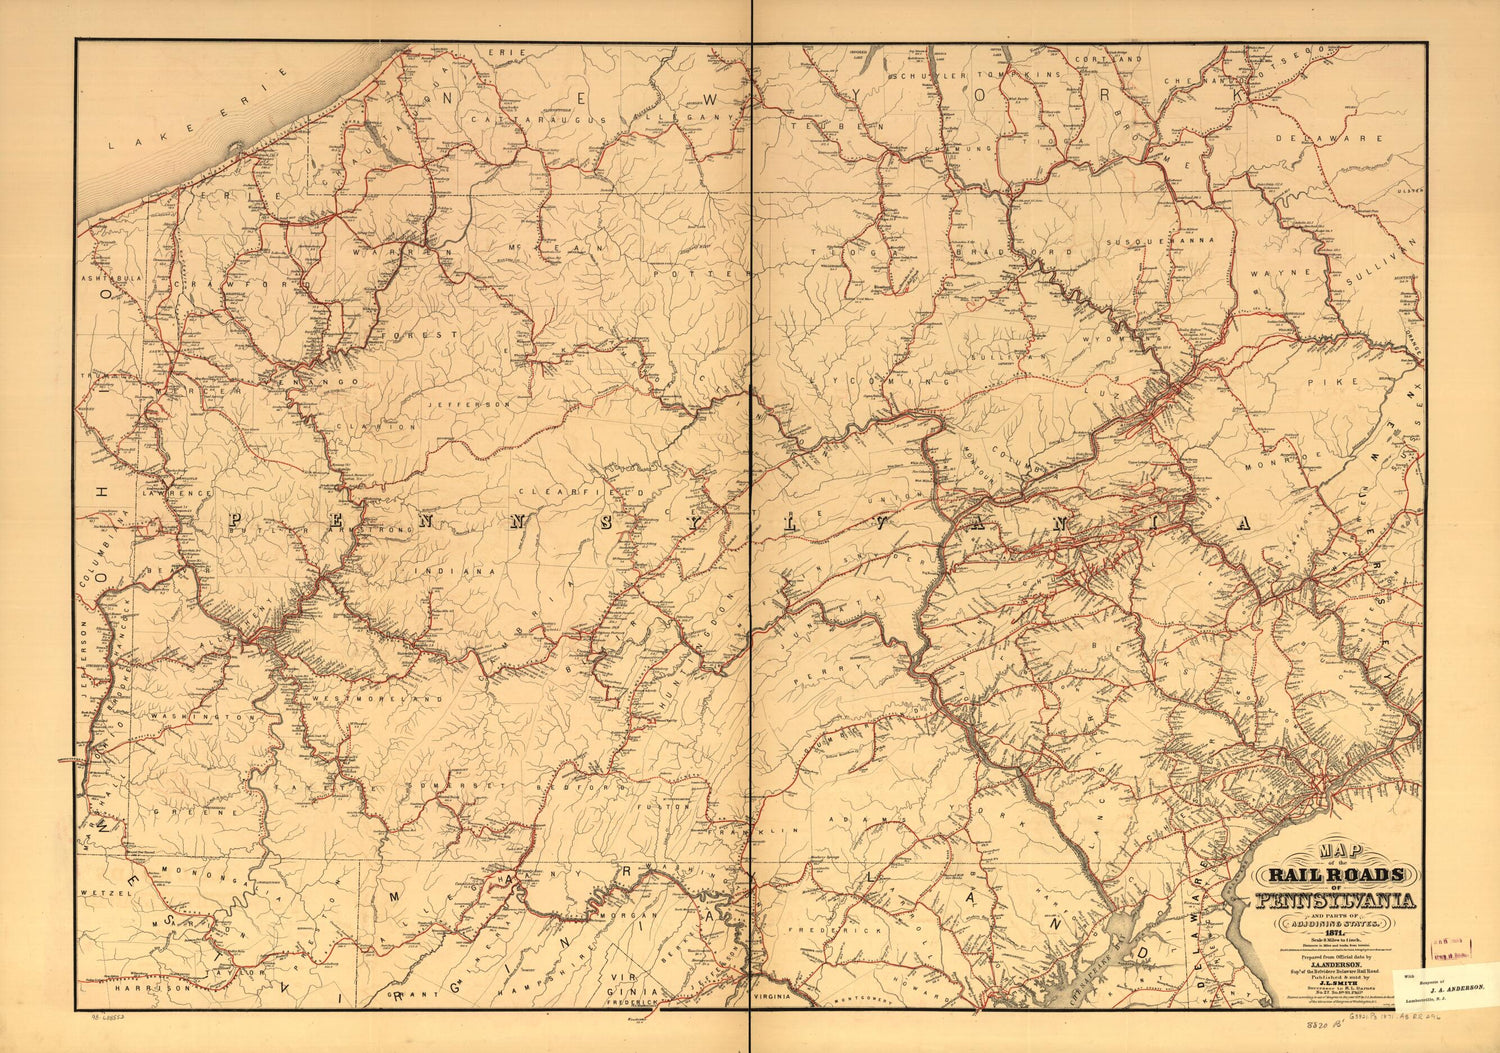 This old map of Map of the Rail Roads of Pennsylvania and Parts of Adjoining States from 1871 was created by J. A. Anderson in 1871